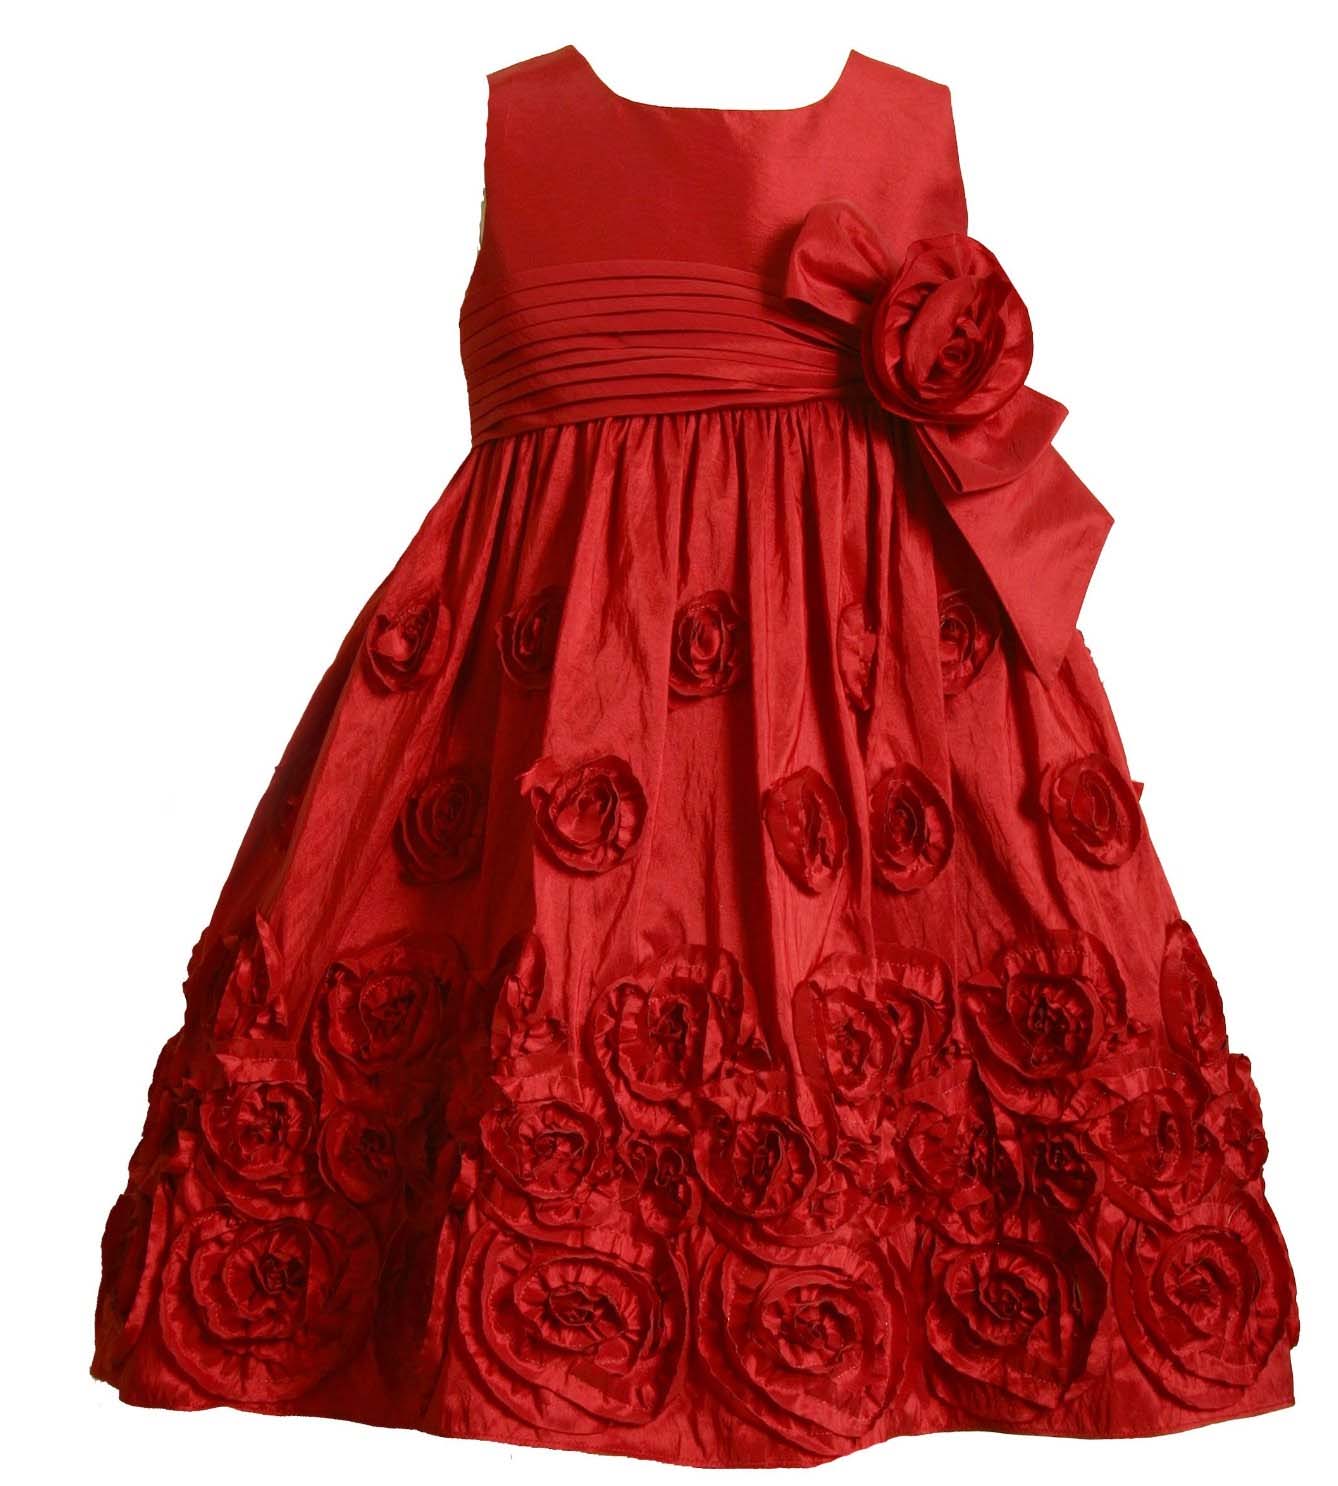 Download this Pretty Dresses For... picture